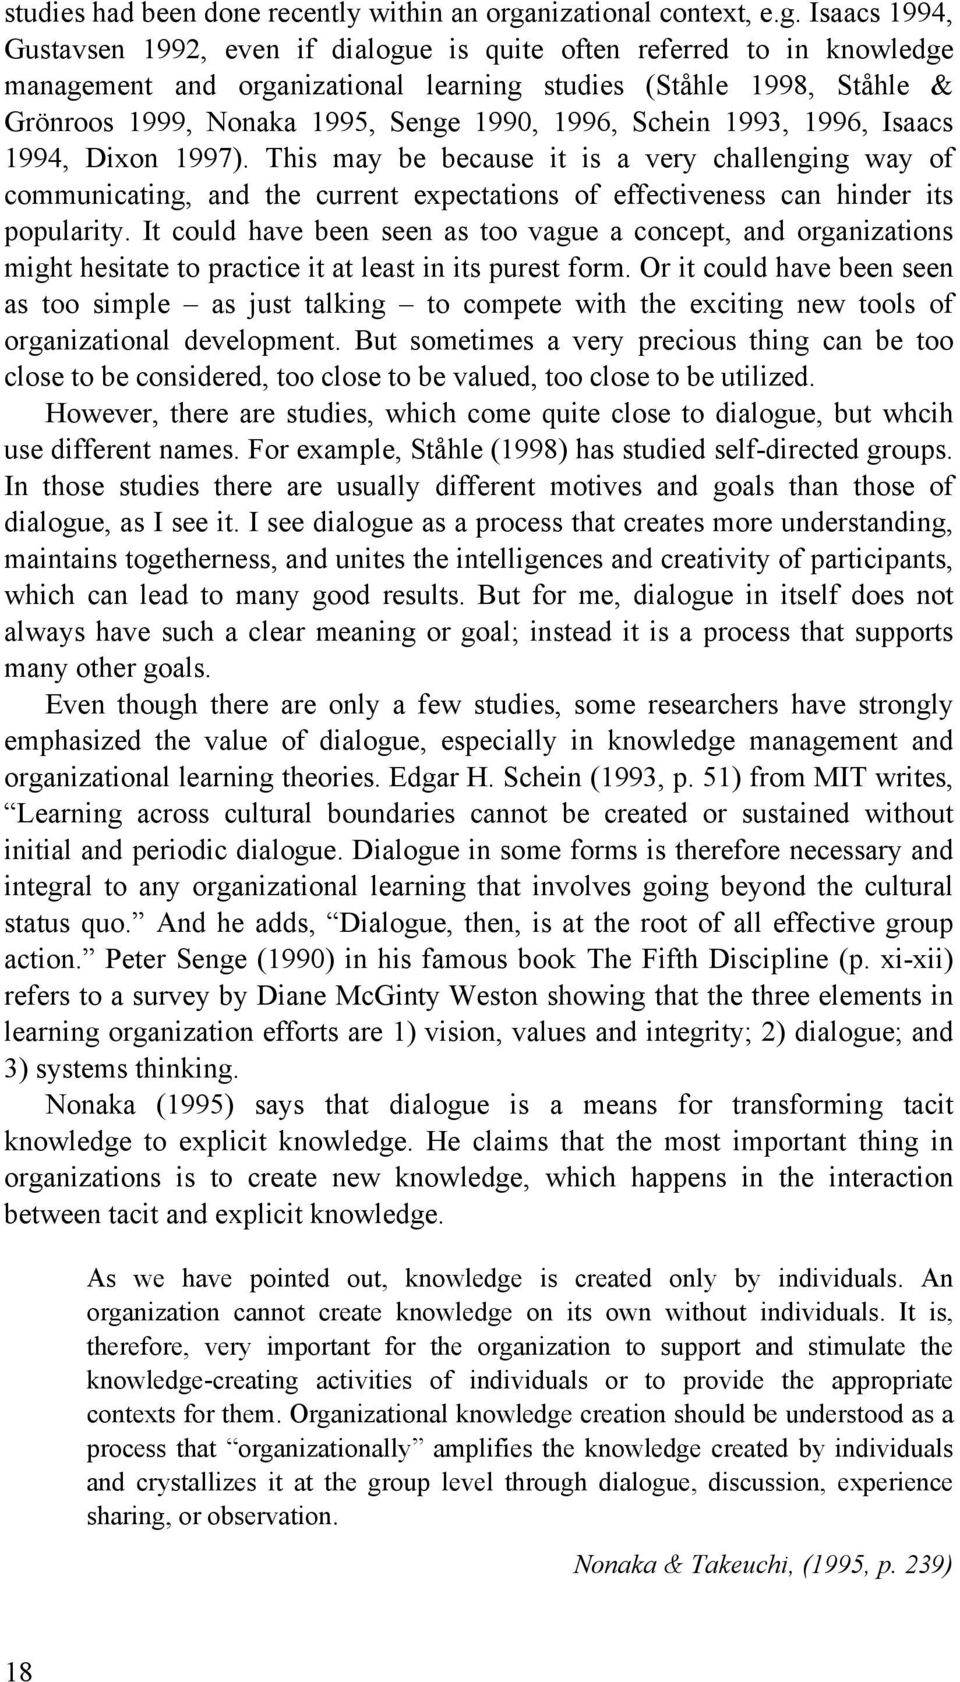 Isaacs 1994, Gustavsen 1992, even if dialogue is quite often referred to in knowledge management and organizational learning studies (Ståhle 1998, Ståhle & Grönroos 1999, Nonaka 1995, Senge 1990,